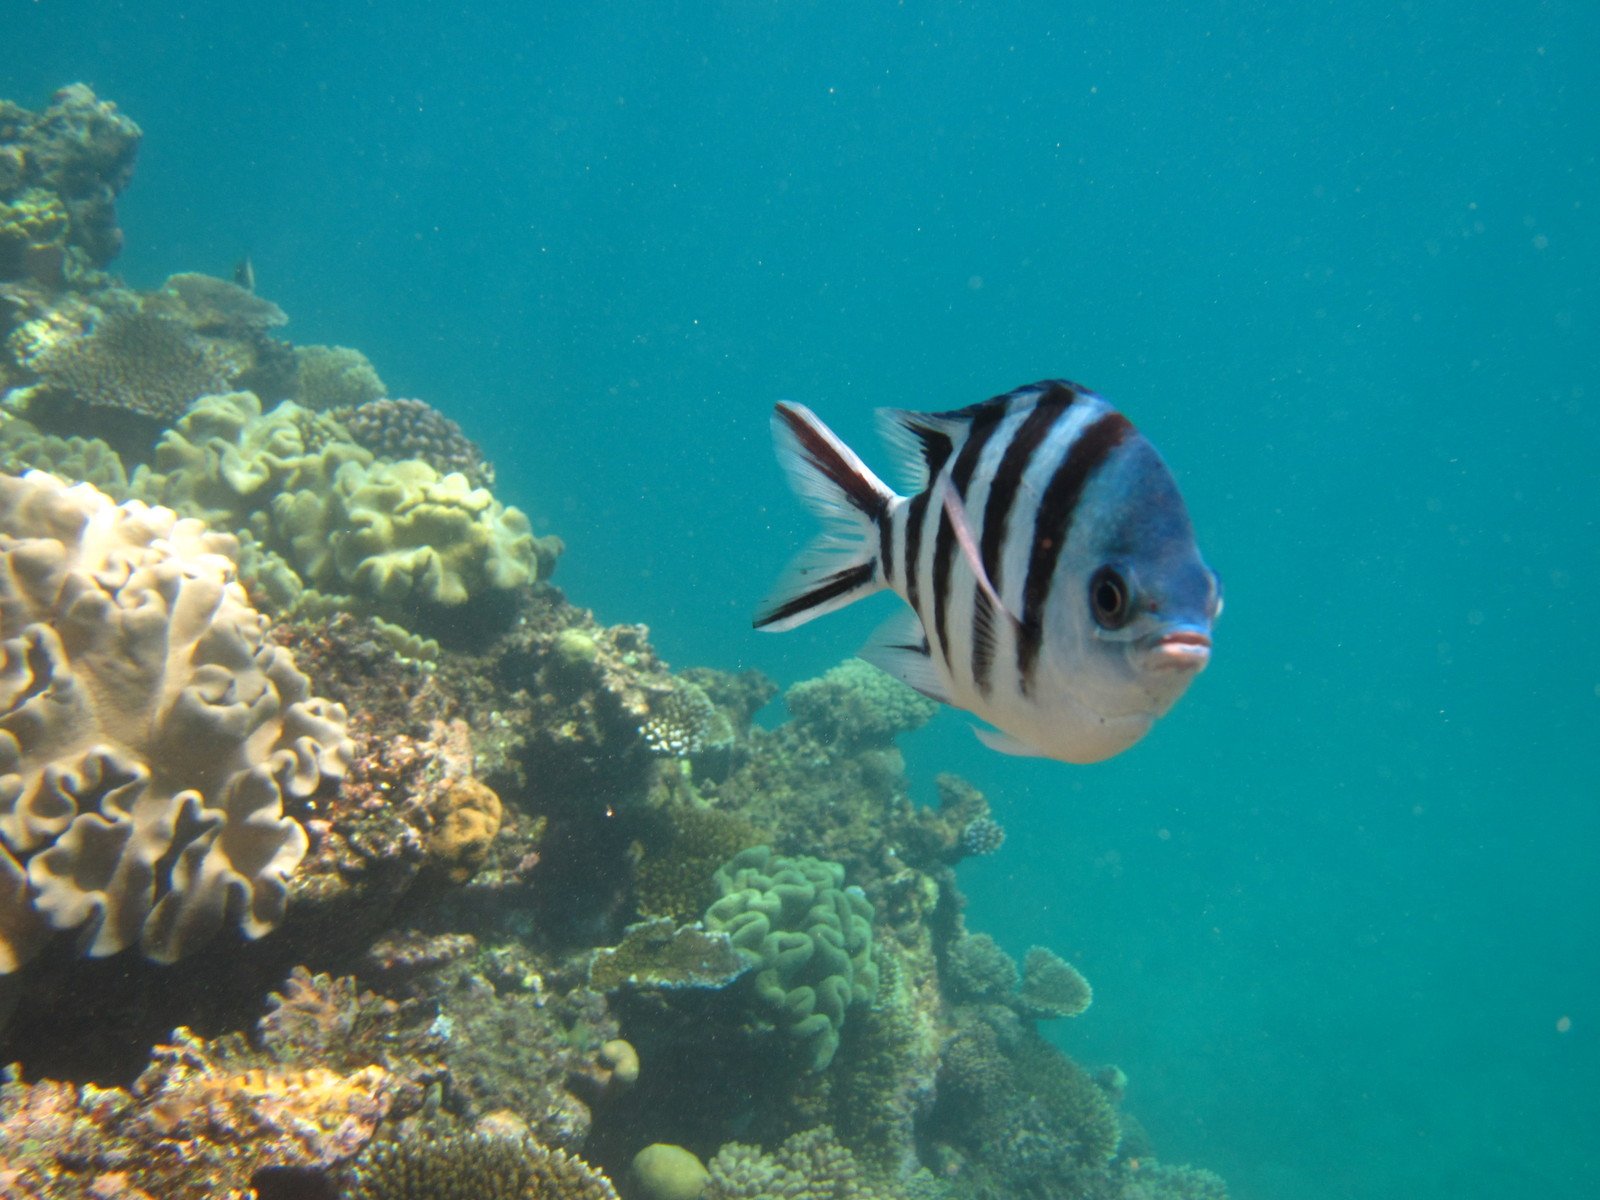 a black and white fish swimming near many coral